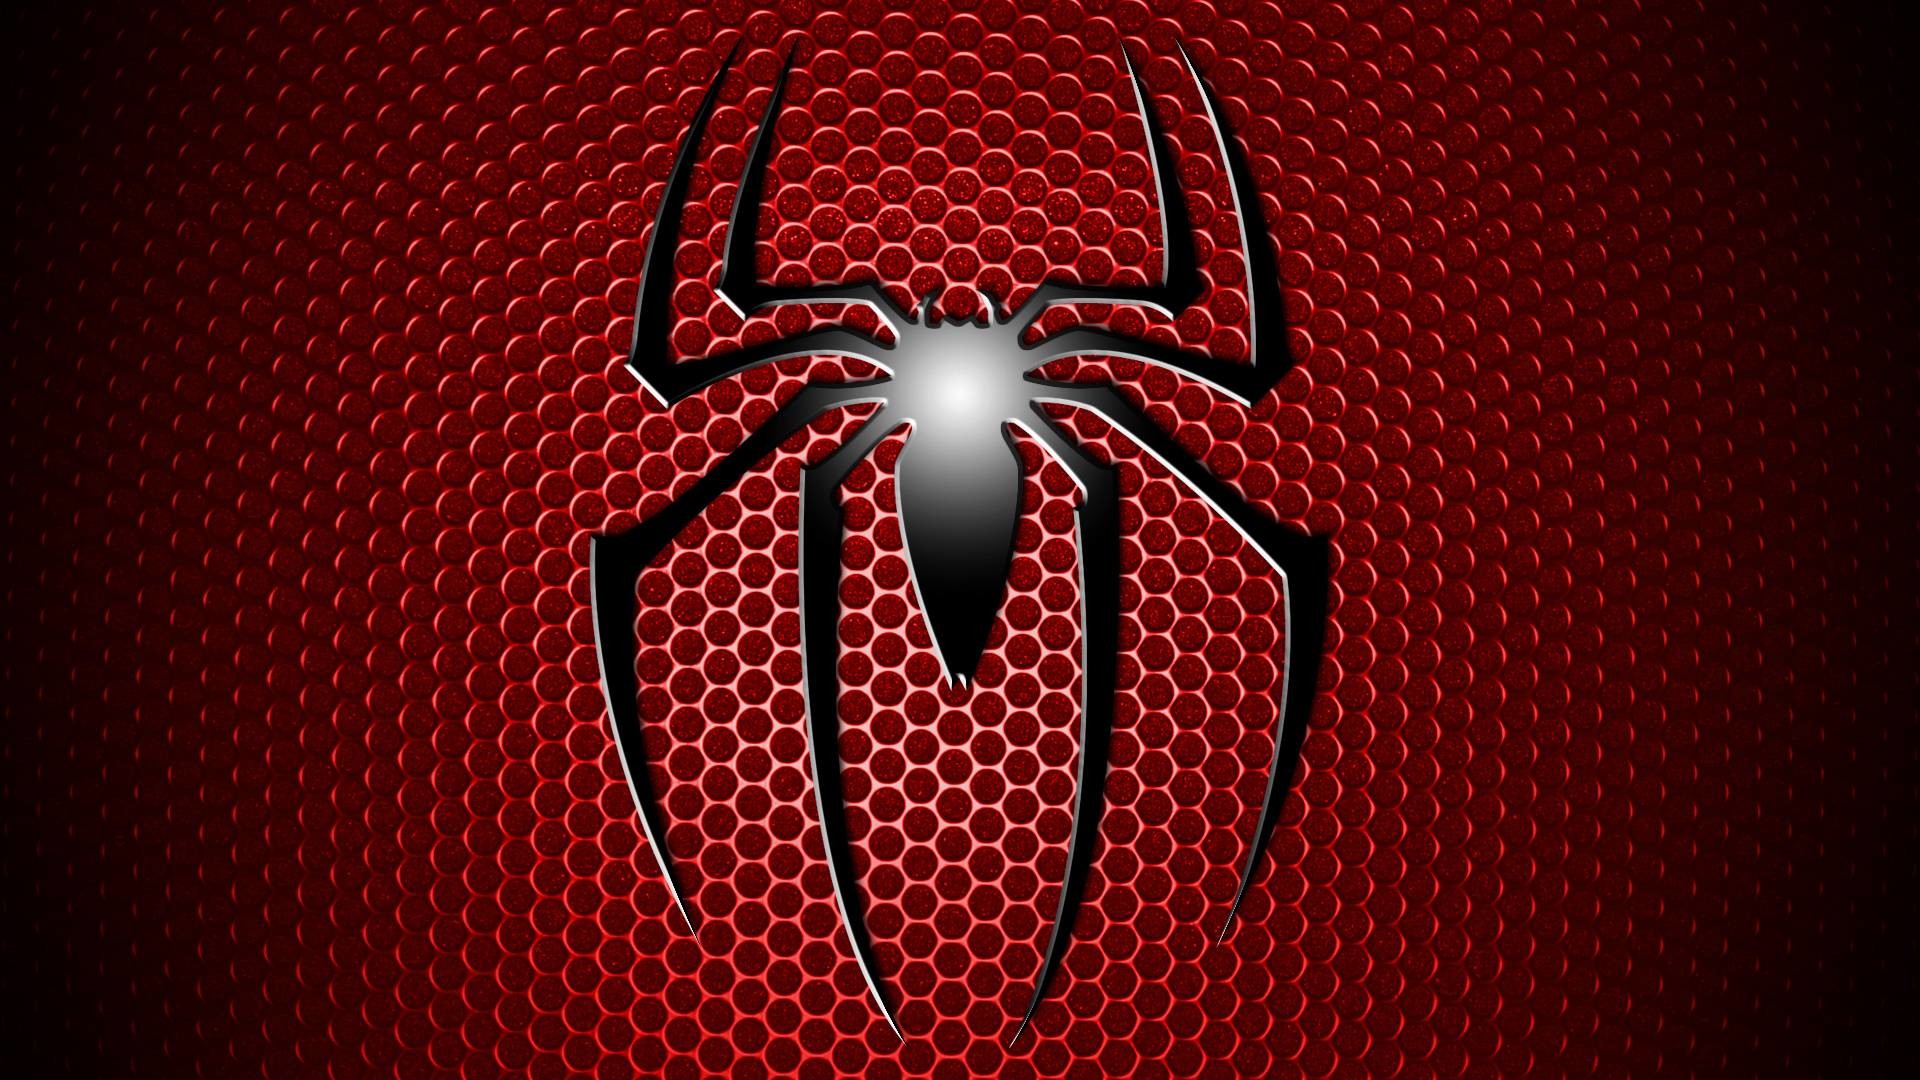 1920x1080 Wallpapers For > Spiderman Logo Wallpaper